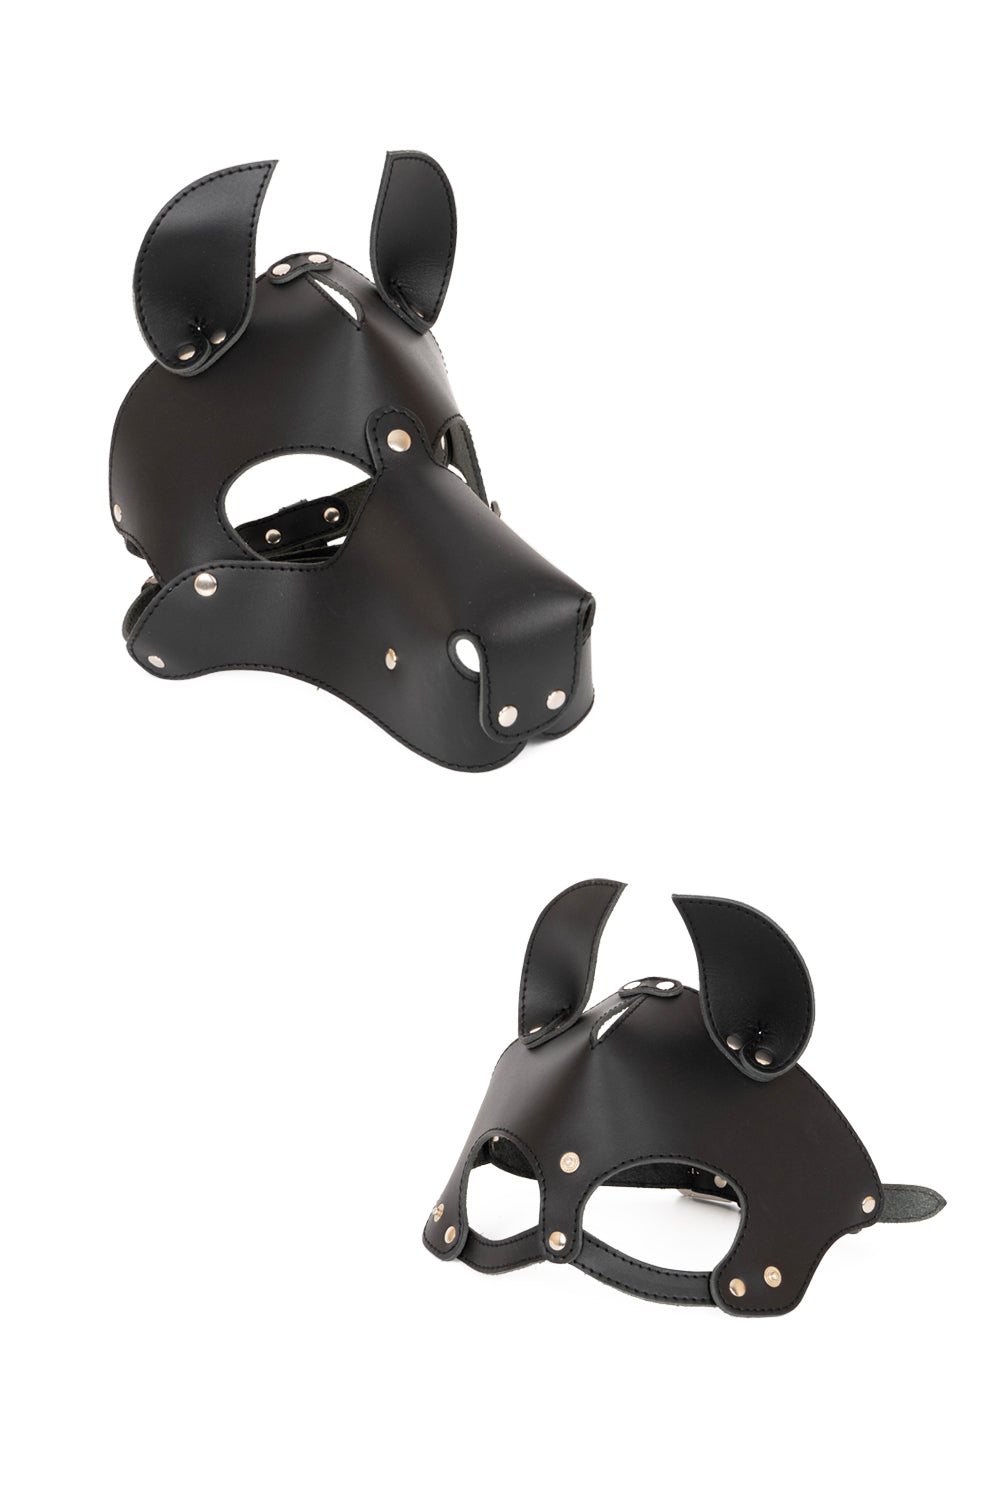 Dog mask with detachable muzzle. Brown